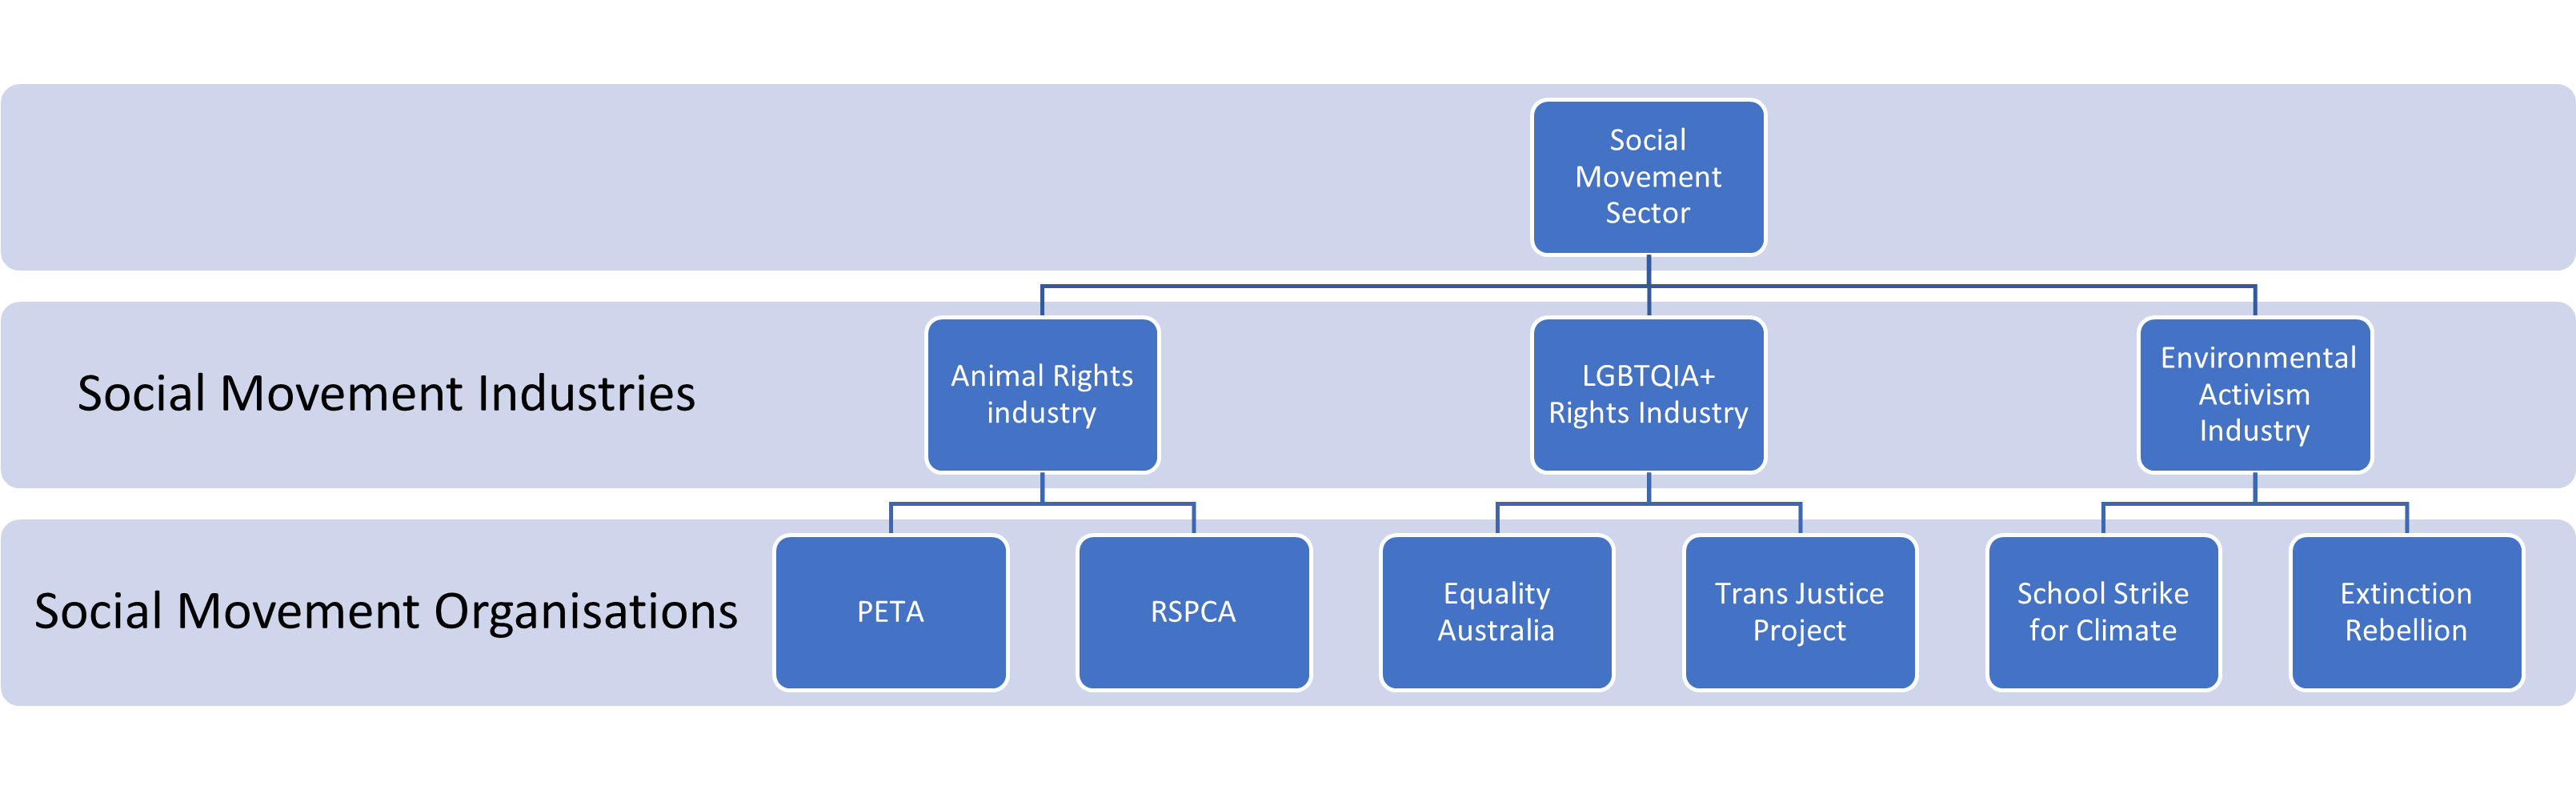 A three-tiered tree diagram. The top tier represents the social movement sector overall. Beneath, on the second tier, are examples of 3 social movement industries: Animal rights, LGBTQUI+ rights and environmental activism. The third tier shows examples of these social movement organisations. Animal rights sample organisations are PETA and RSPCA. LGBTQUI+ rights sample organisations are Equality Australia and Trans Justice Project. Environmental activism sample organisations are School Strike for Climate and Extinction Rebellion.